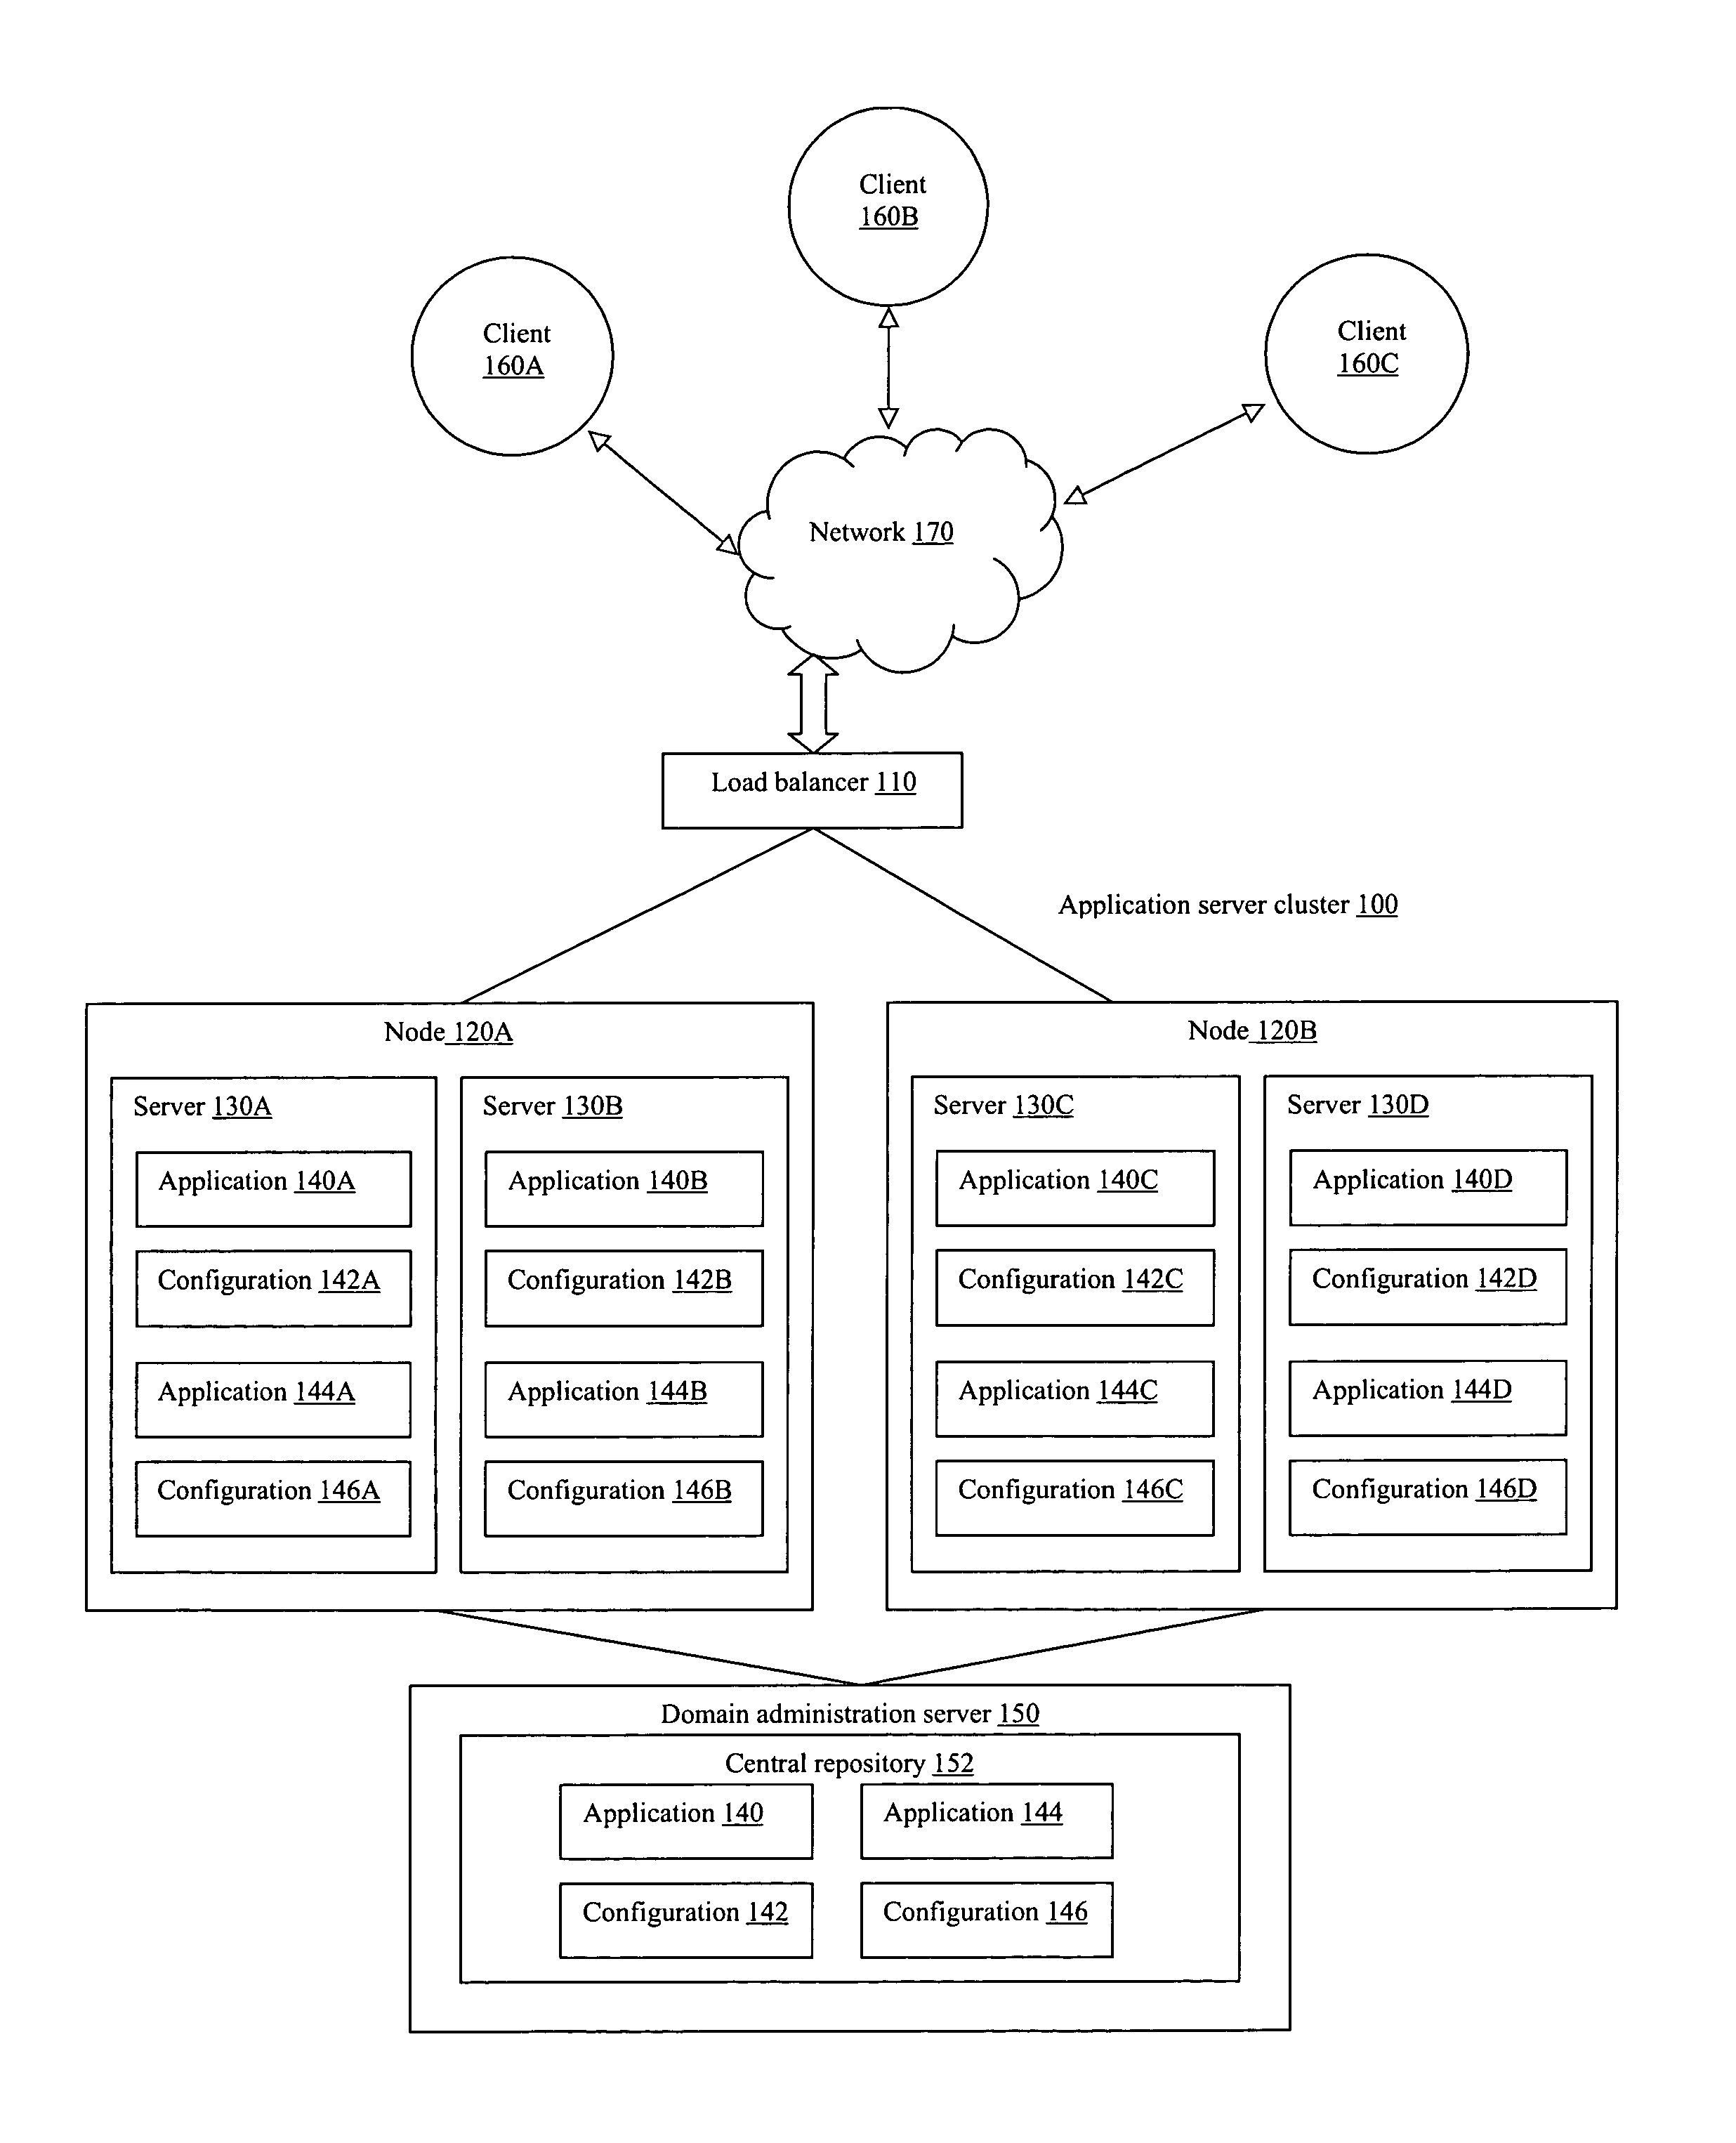 System and method for model-based configuration of a server cluster